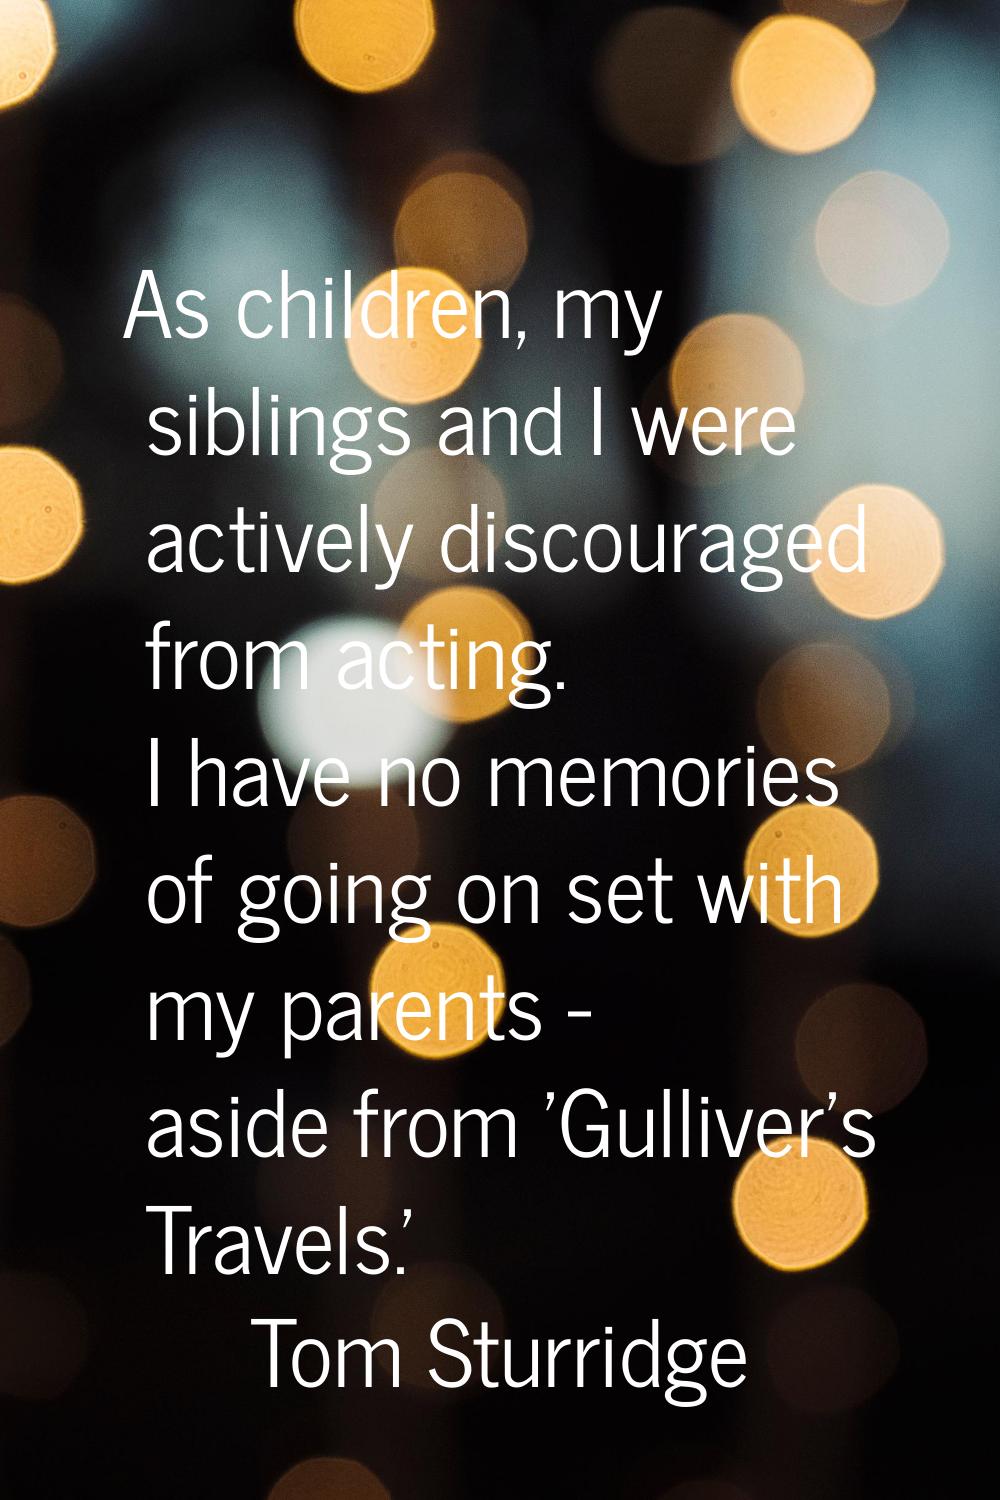 As children, my siblings and I were actively discouraged from acting. I have no memories of going o